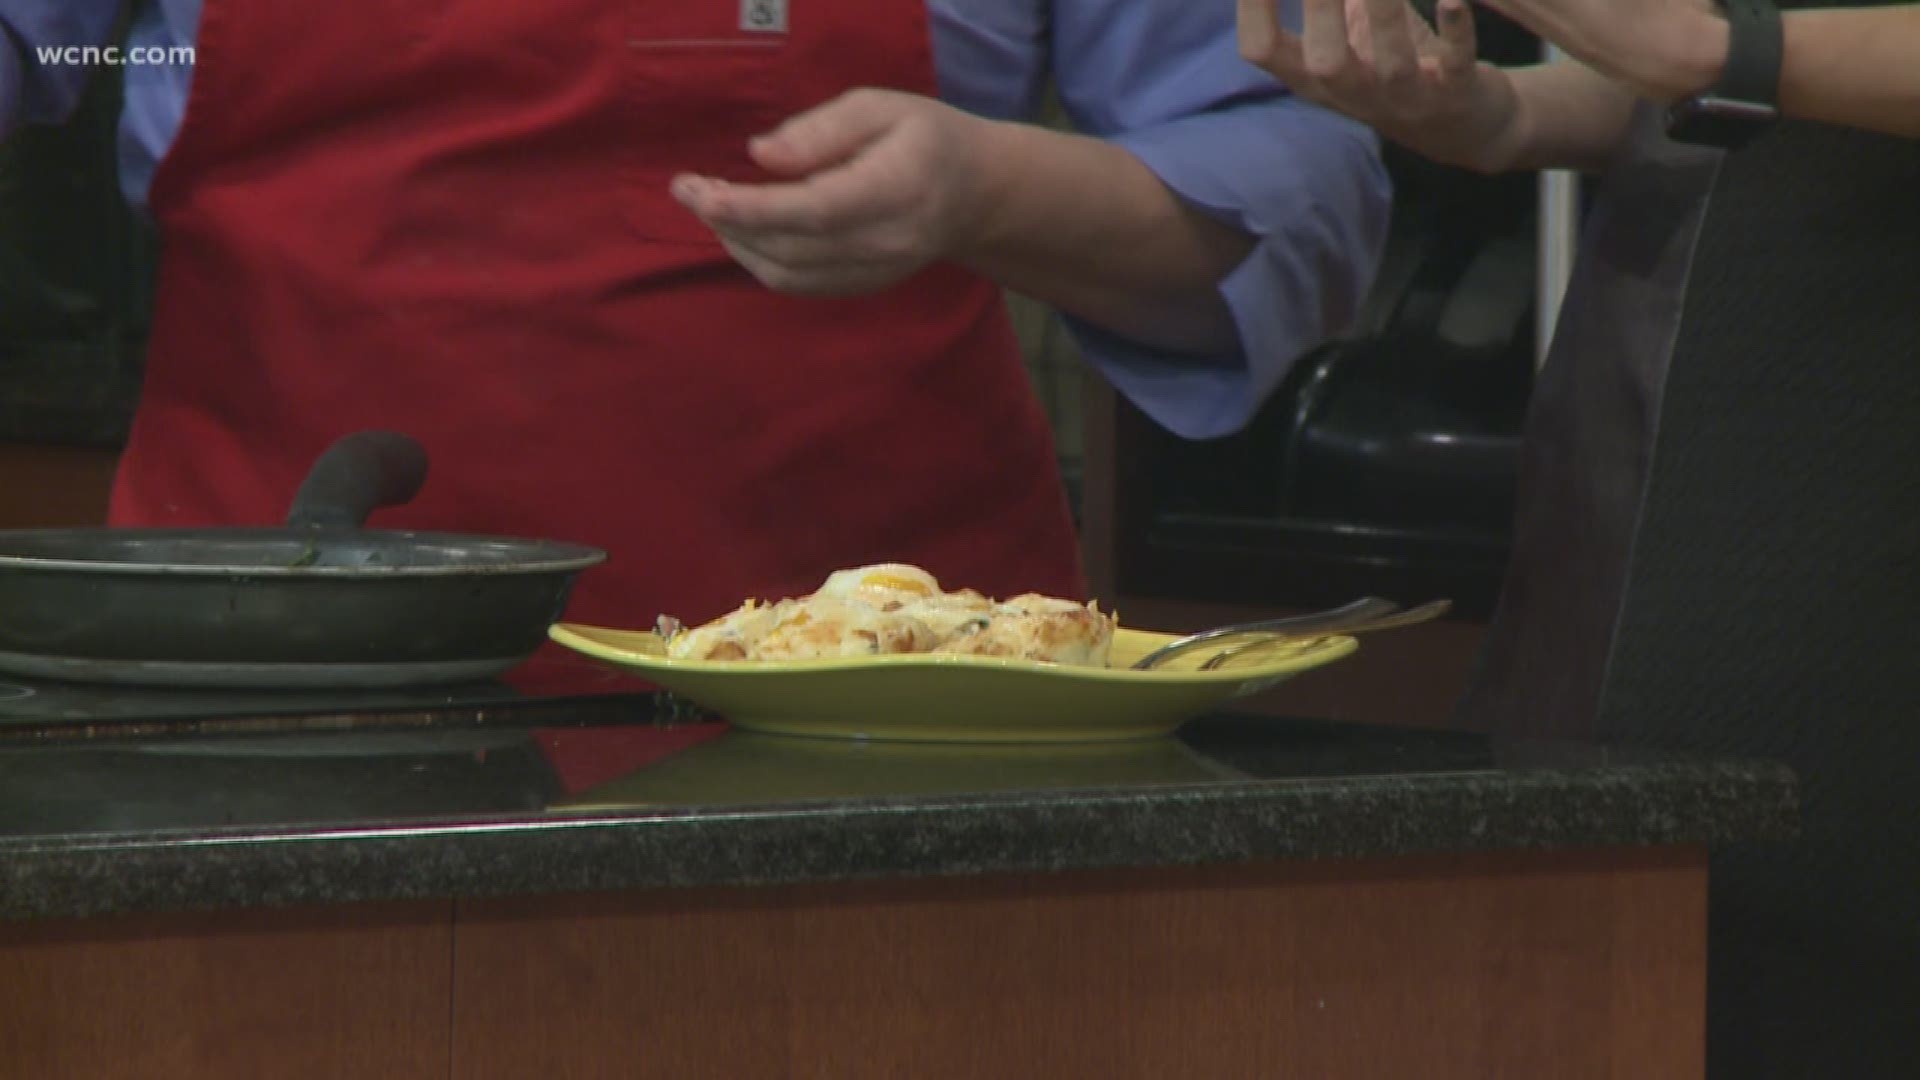 Chef Jenny Brule of Davidson Ice House cooks up a delicious breakfast using leftover ingredients laying around the kitchen.